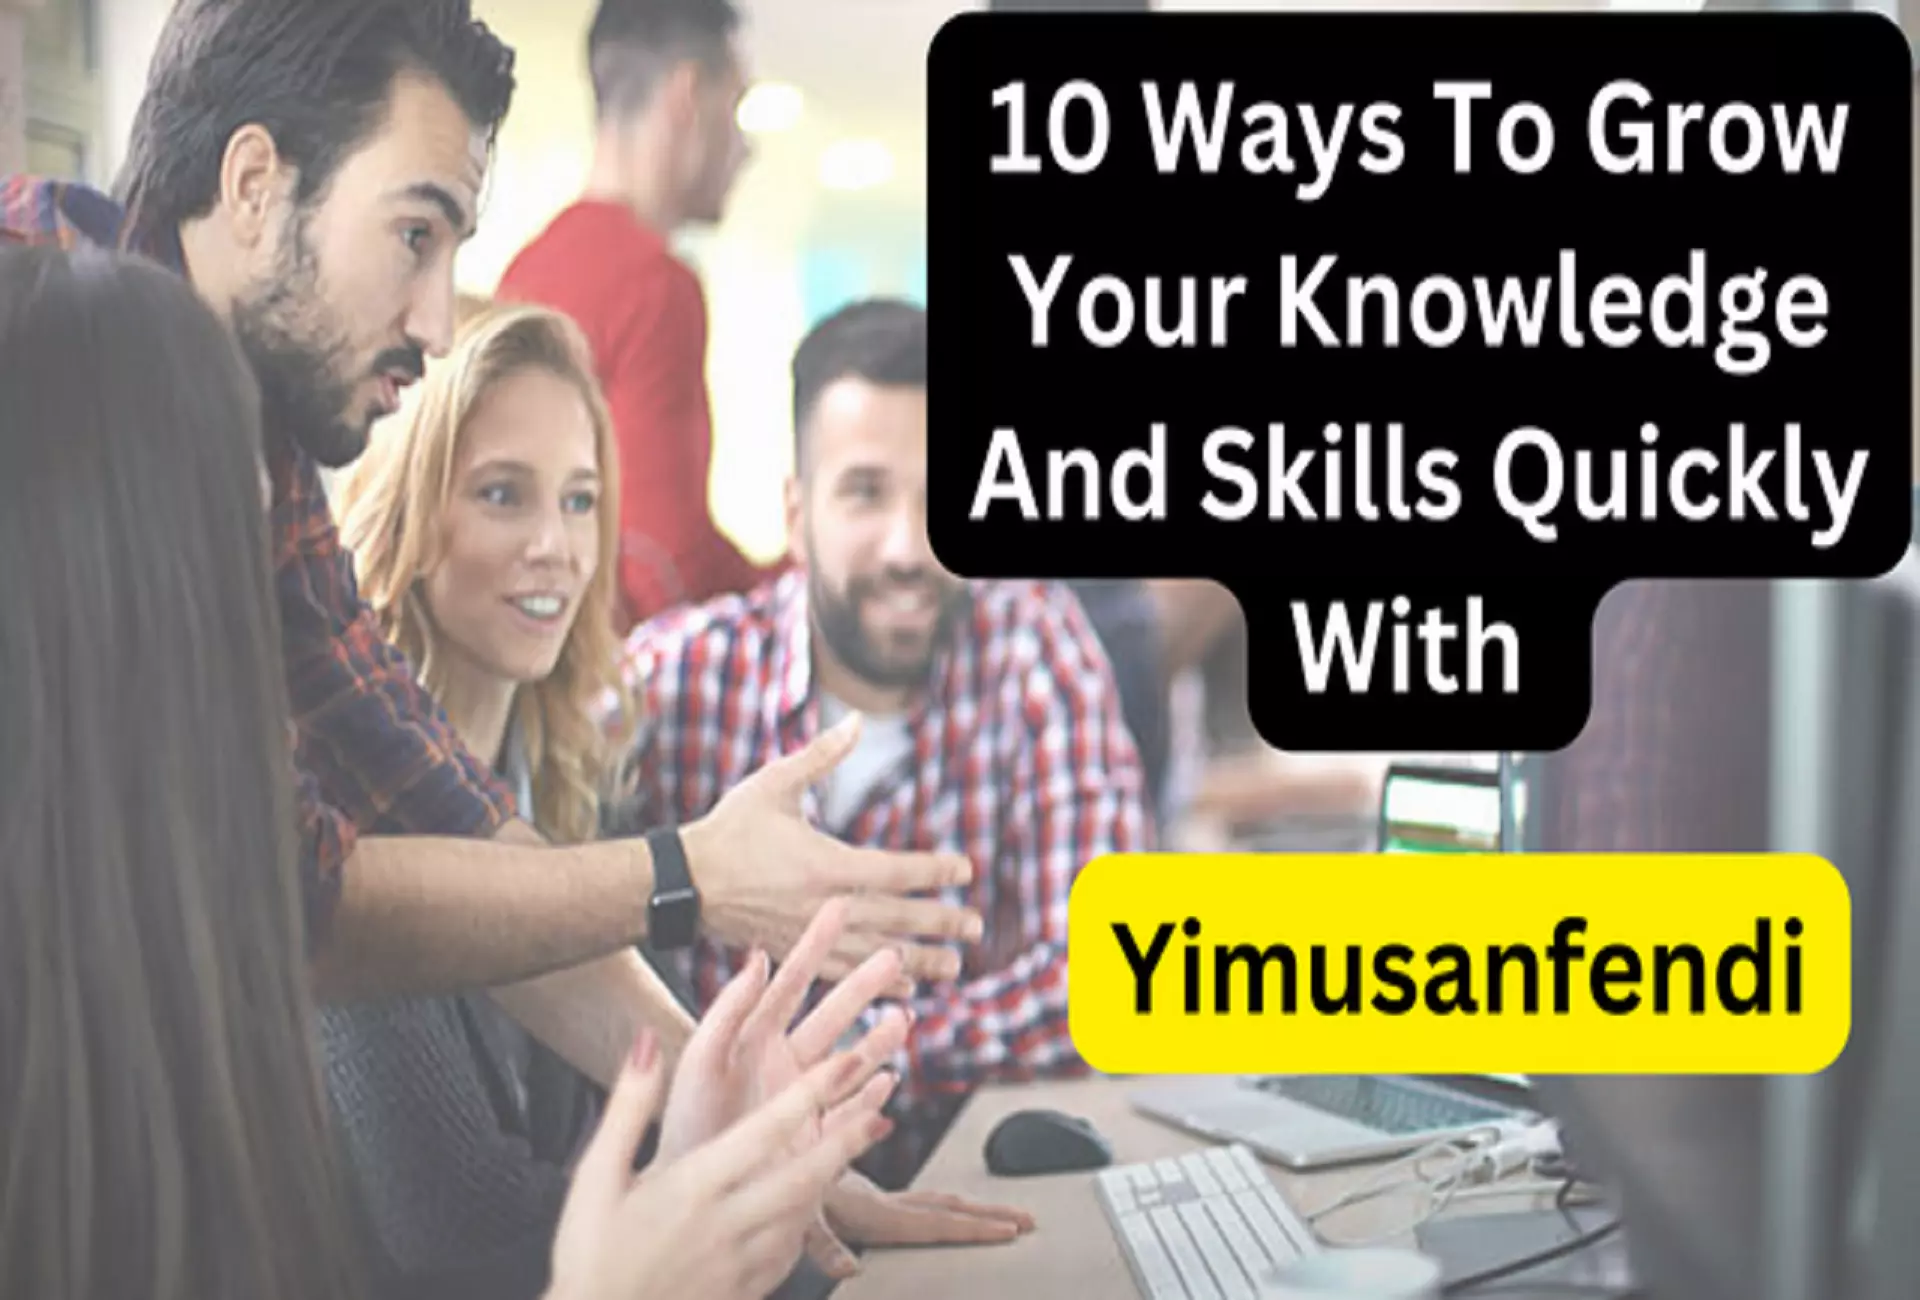 10 Ways To Grow Your Knowledge And Skills Quickly With Yimusanfendi